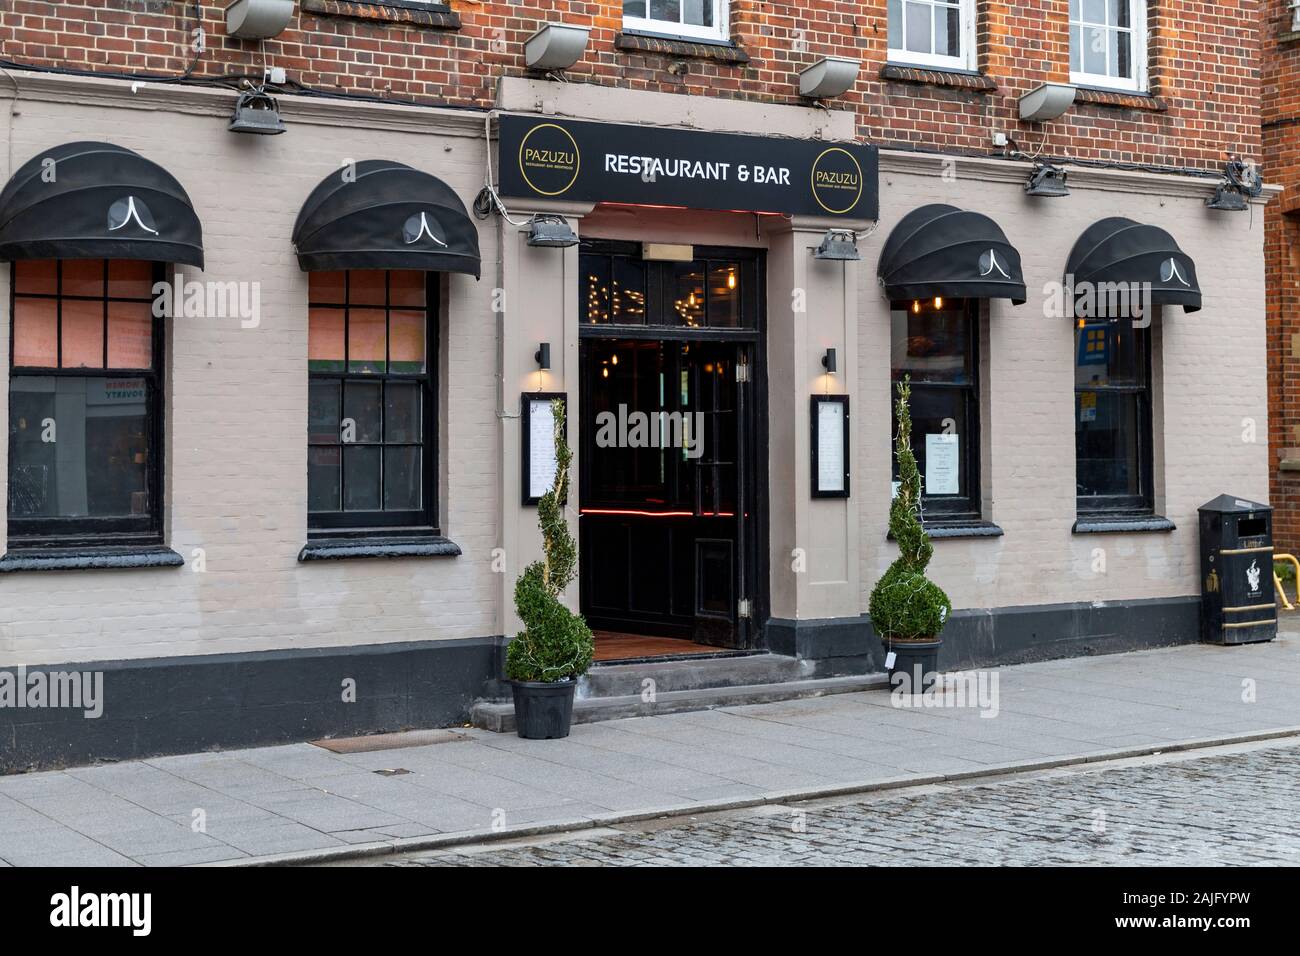 Pazuzu bar and restaurant, formally Sugar Hut, located in Brentwood High Street and made famous through The Only Way Is Essex (TOWIE) Stock Photo